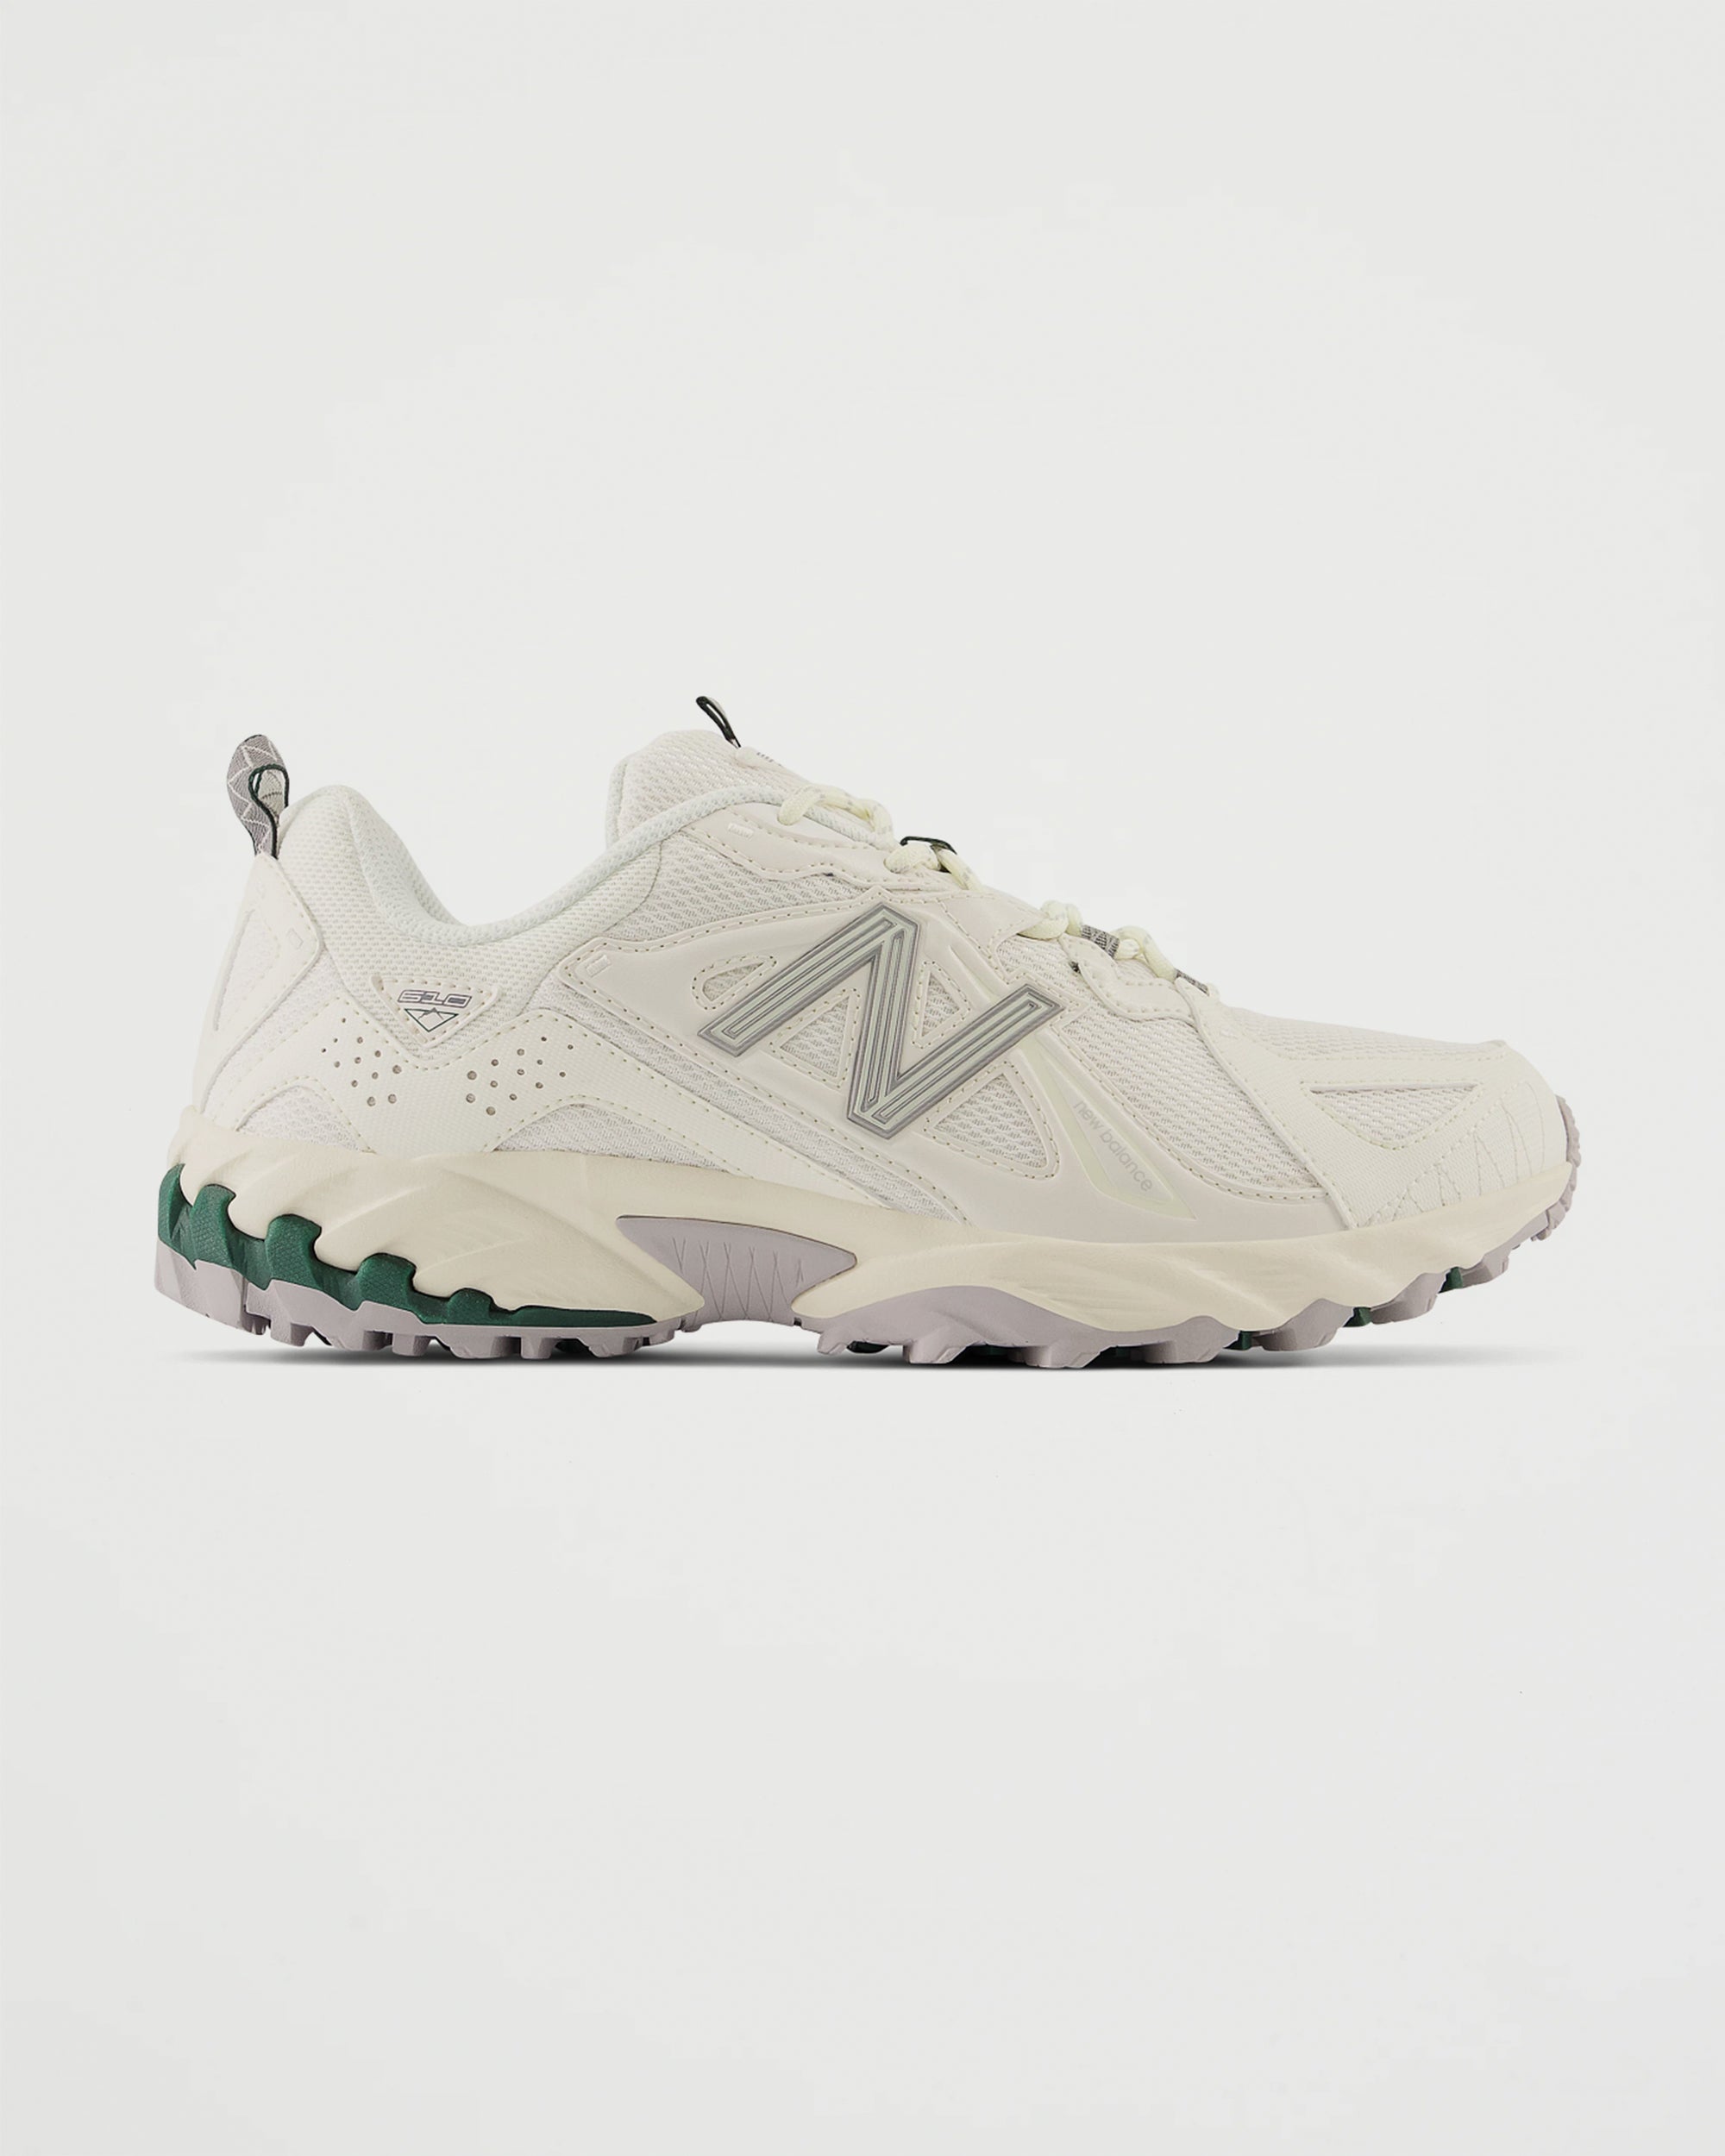 New Balance 610 TAG Angora Shoes Sneakers Unisex